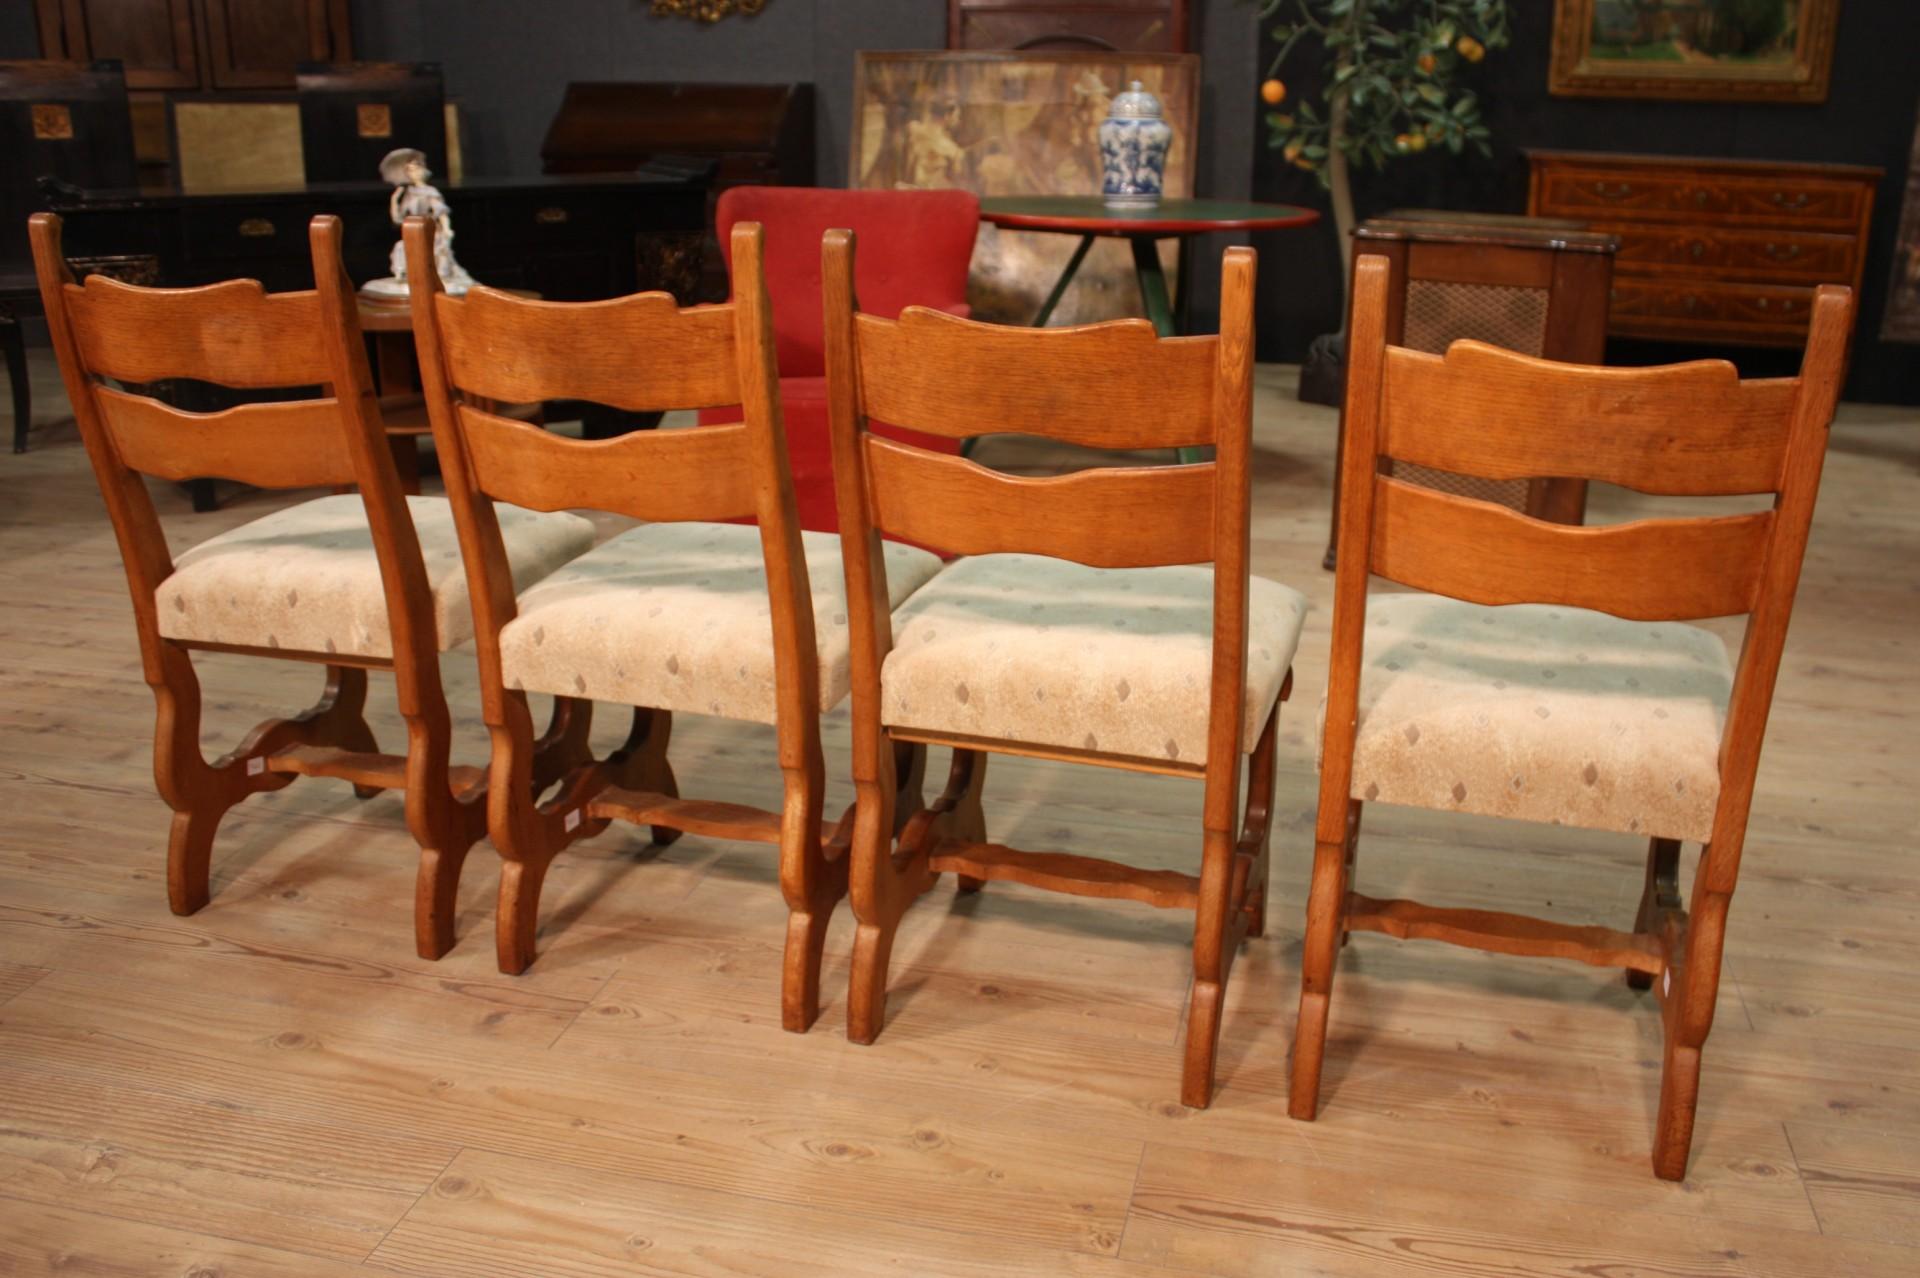 Group of 4 Rustic Northern European Chairs, 20th Century For Sale 3